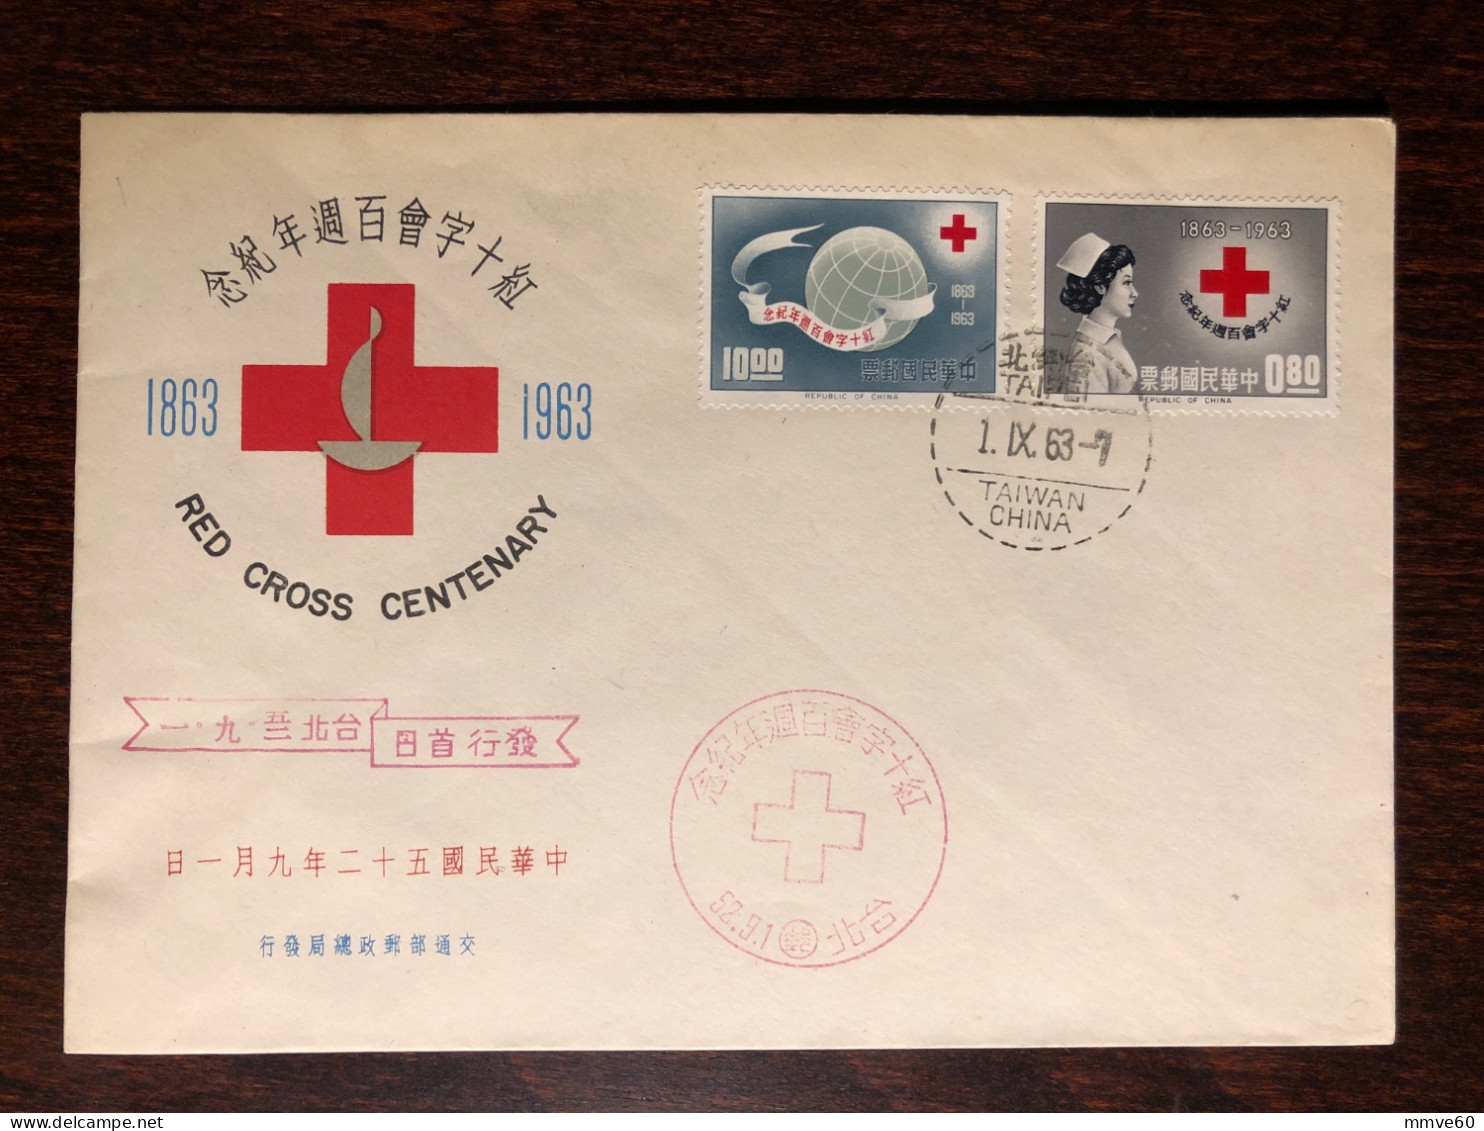 TAIWAN ROC FDC COVER 1963 YEAR RED CROSS HEALTH MEDICINE STAMPS - FDC